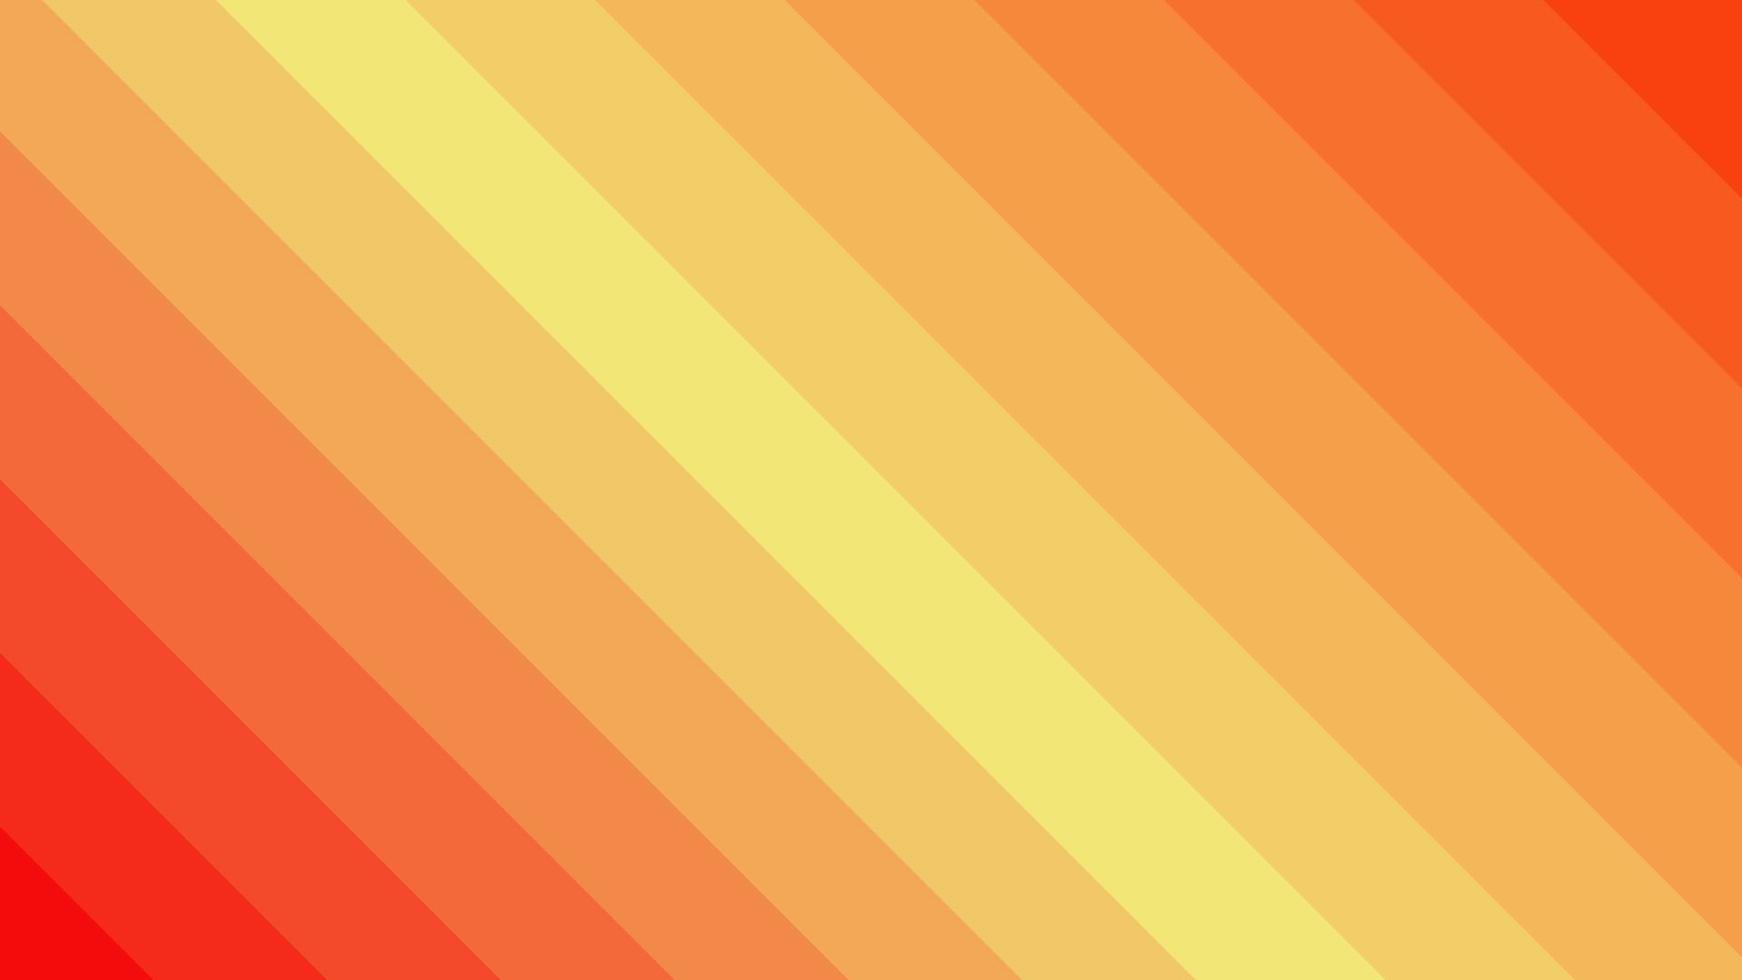 A red and yellow striped wallpaper - Orange, abstract